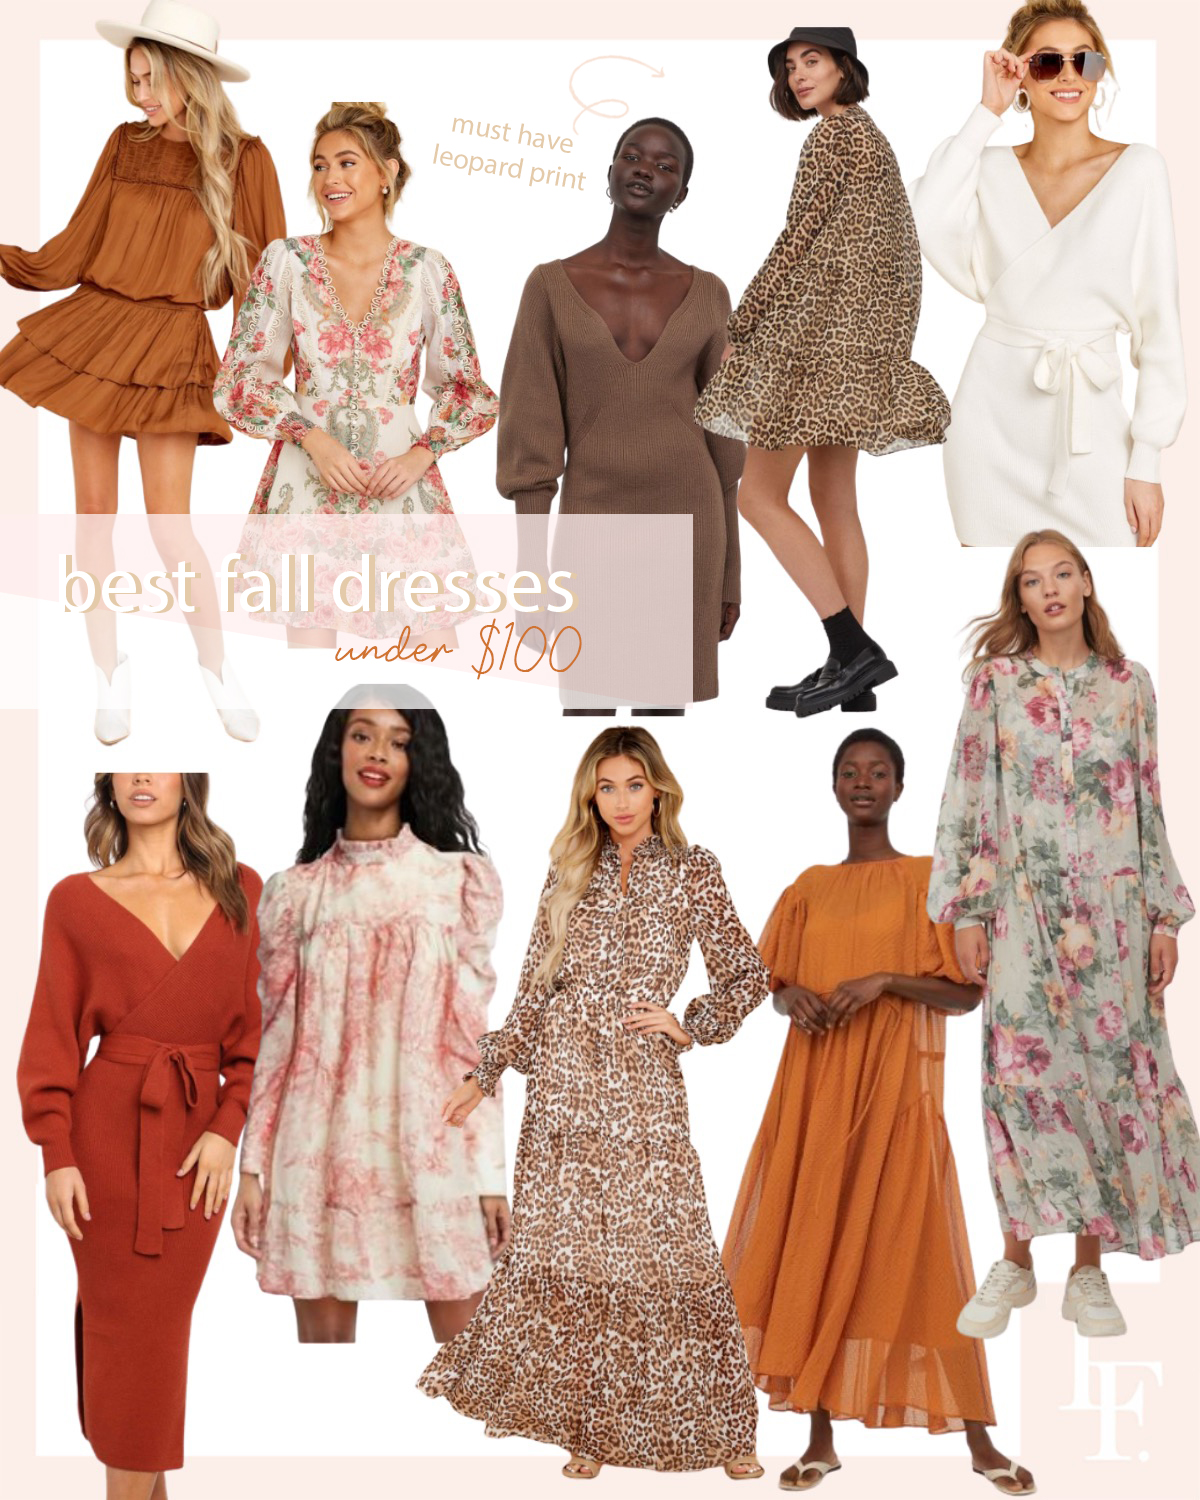 Best fall dresses under $100 you need, featured by San Francisco style blogger Lombard and Fifth.